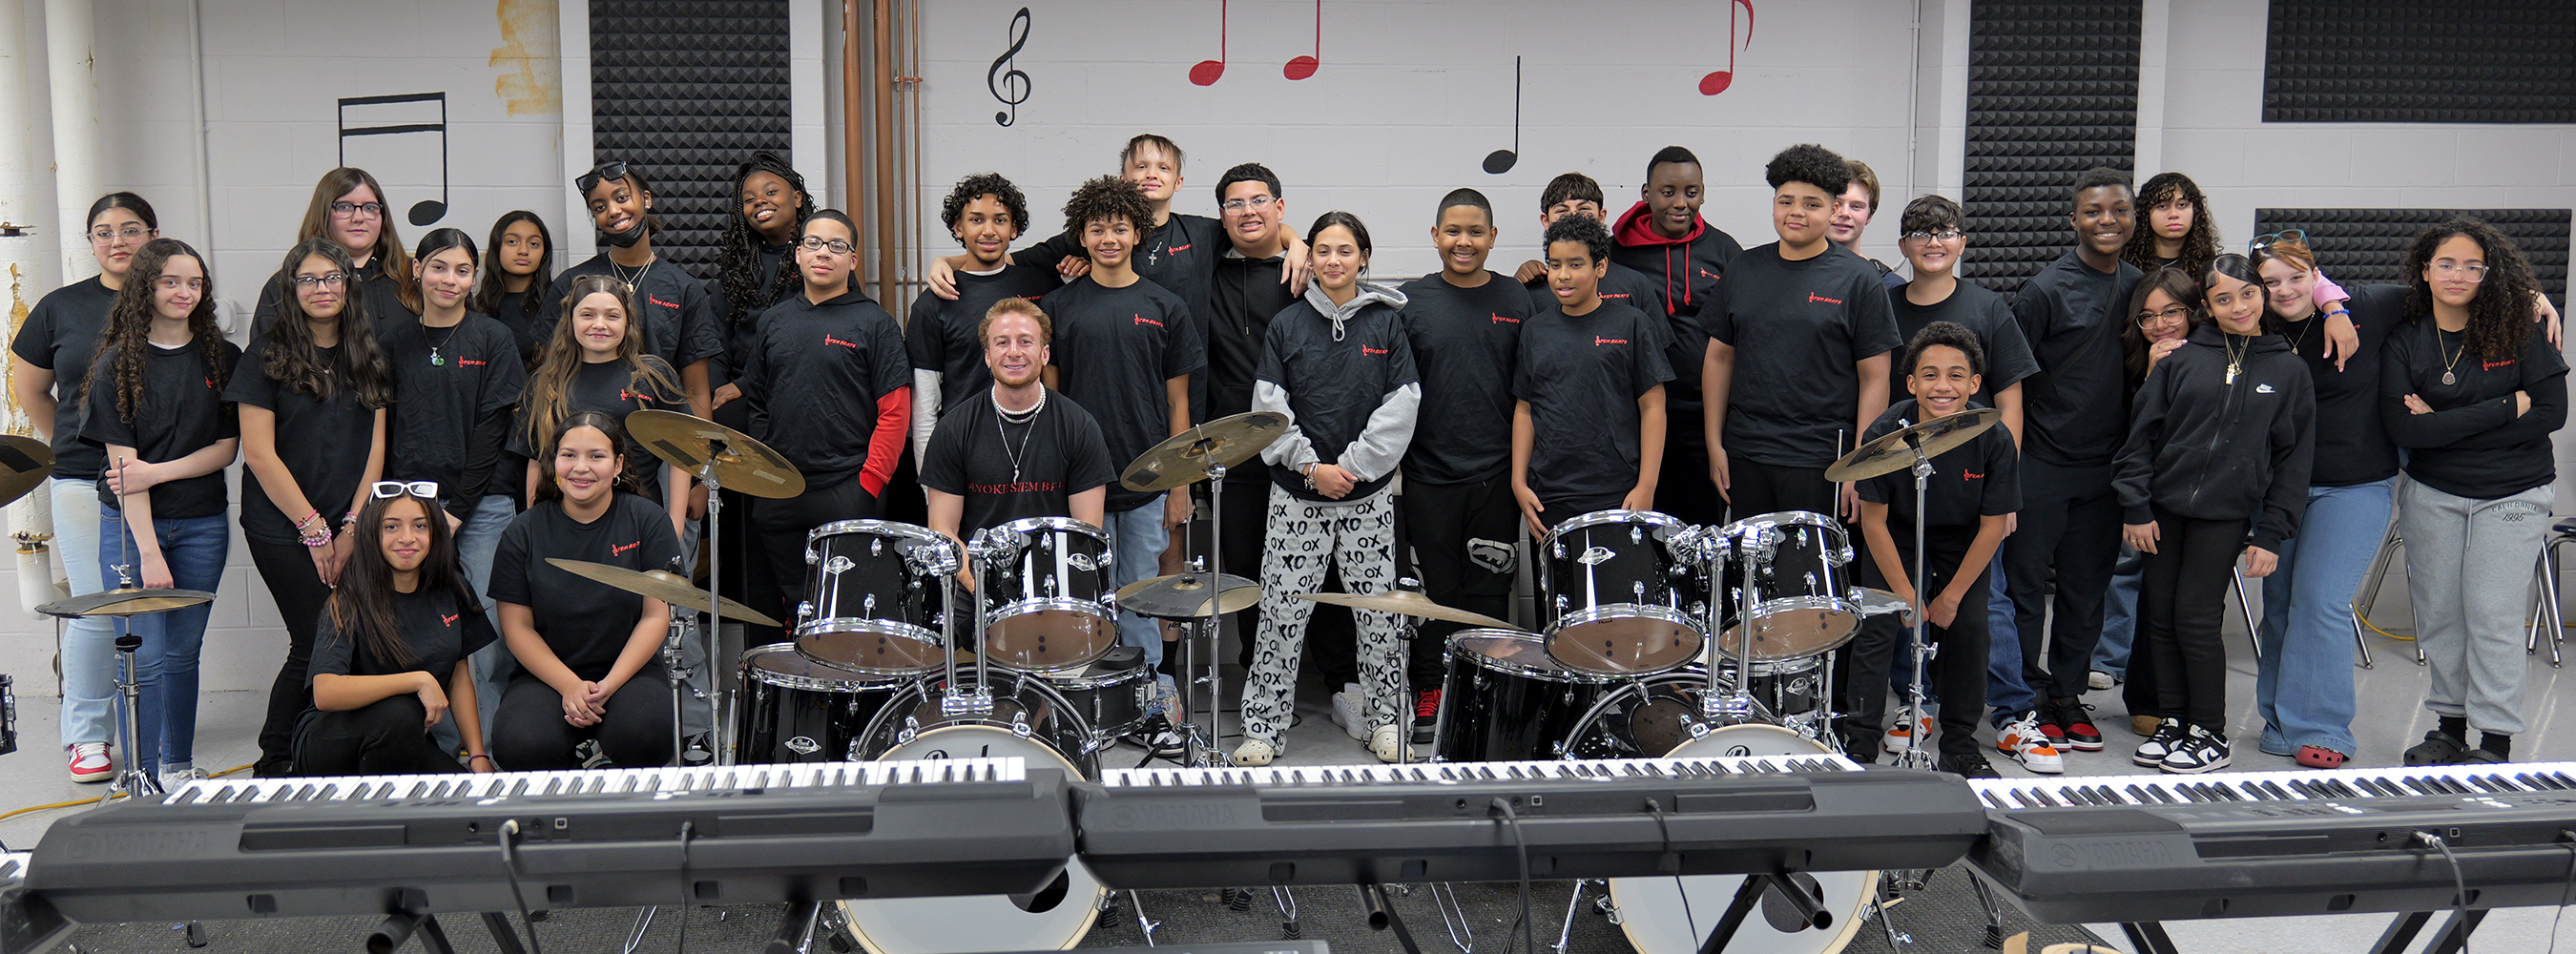 STEM Academy music students in front of keyboards